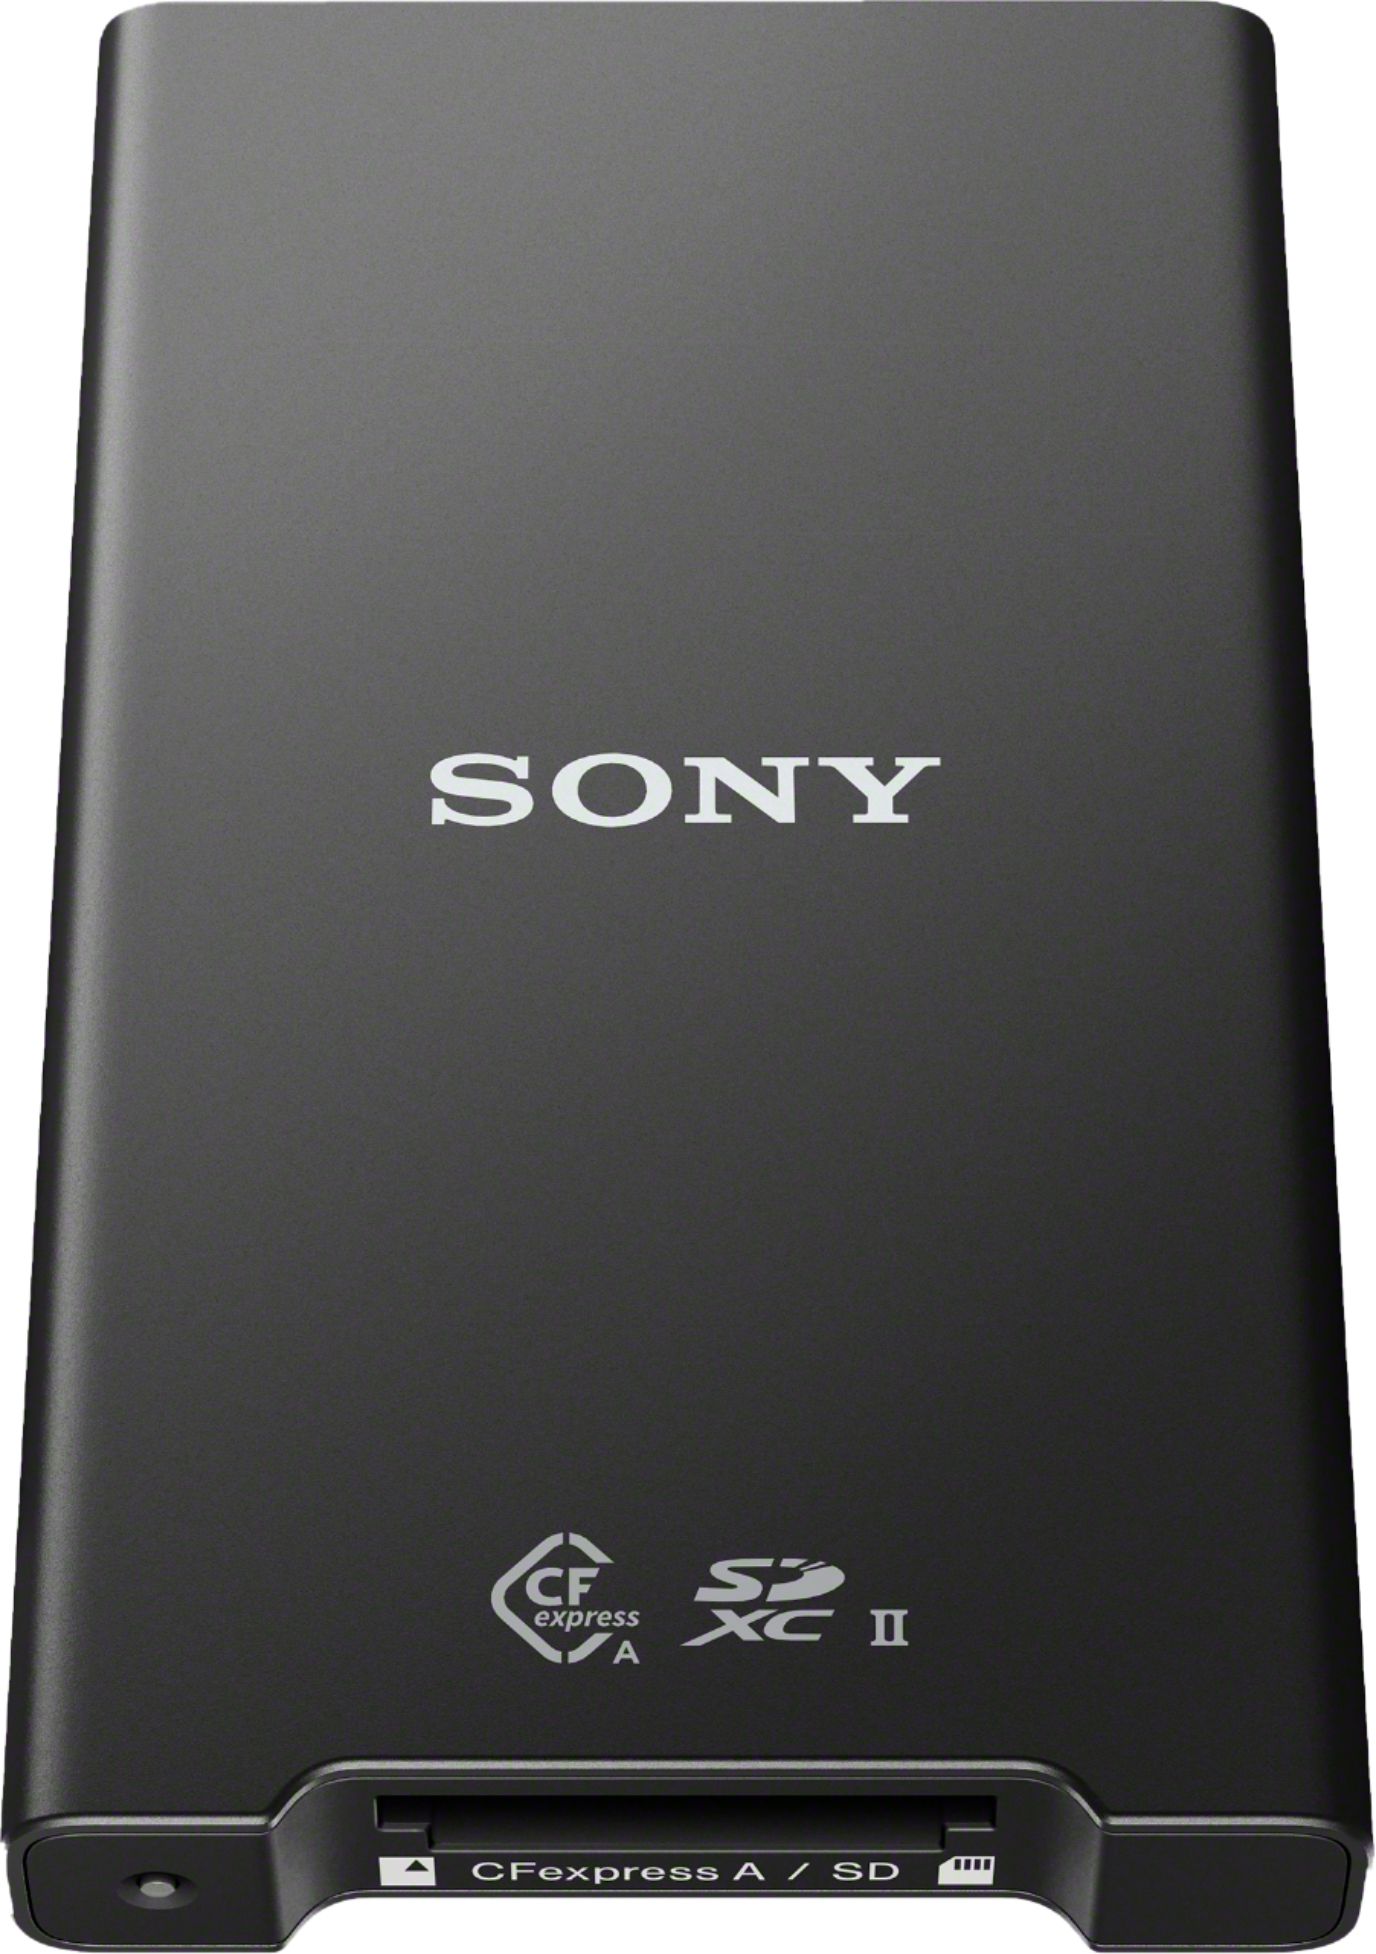 Sony CFexpress Type A SD Card Reader Black MRWG2 - Best Buy